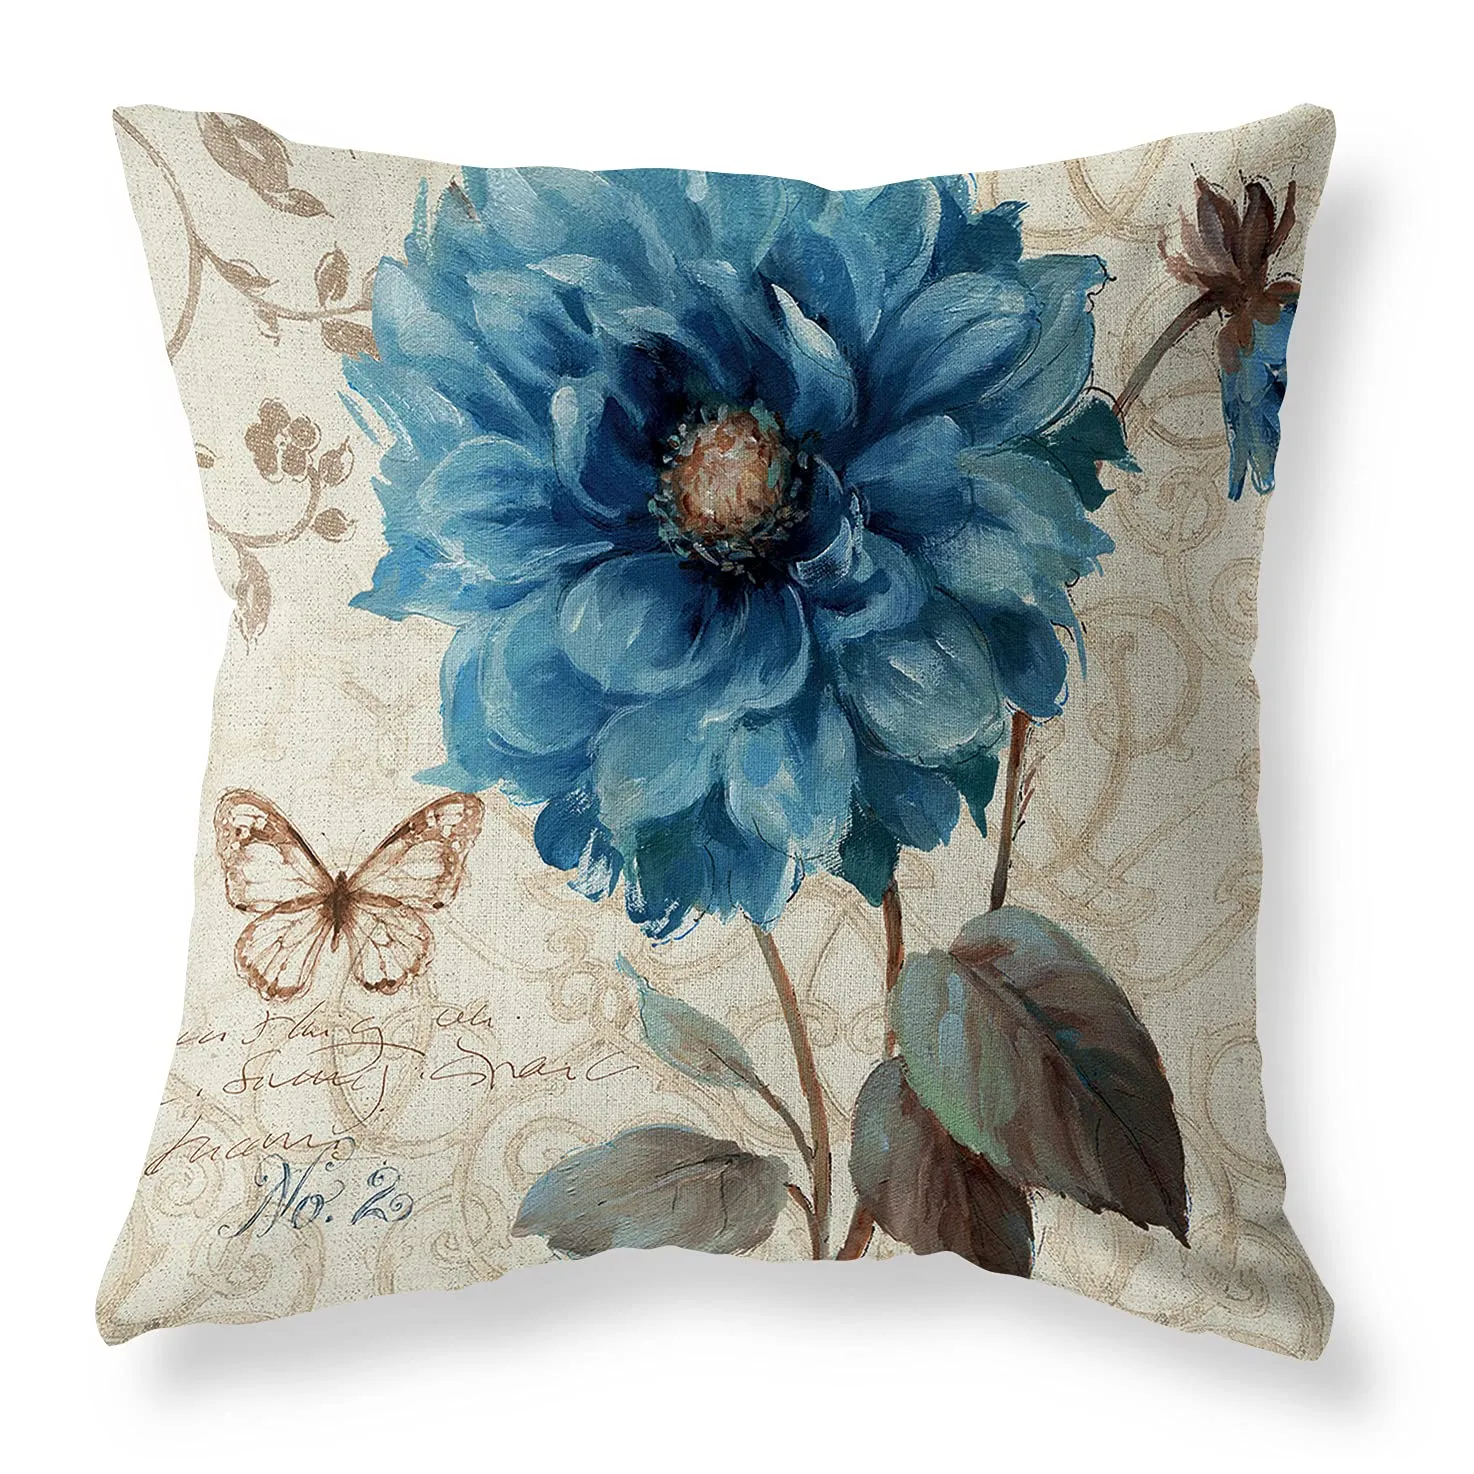 set of 4 farmhouse blue flower throw pillow covers 18x18 inch orchid butterfly cotton linen floral cushion case outdoor sofa throw pillows cover for couch living room bed indoors home decor